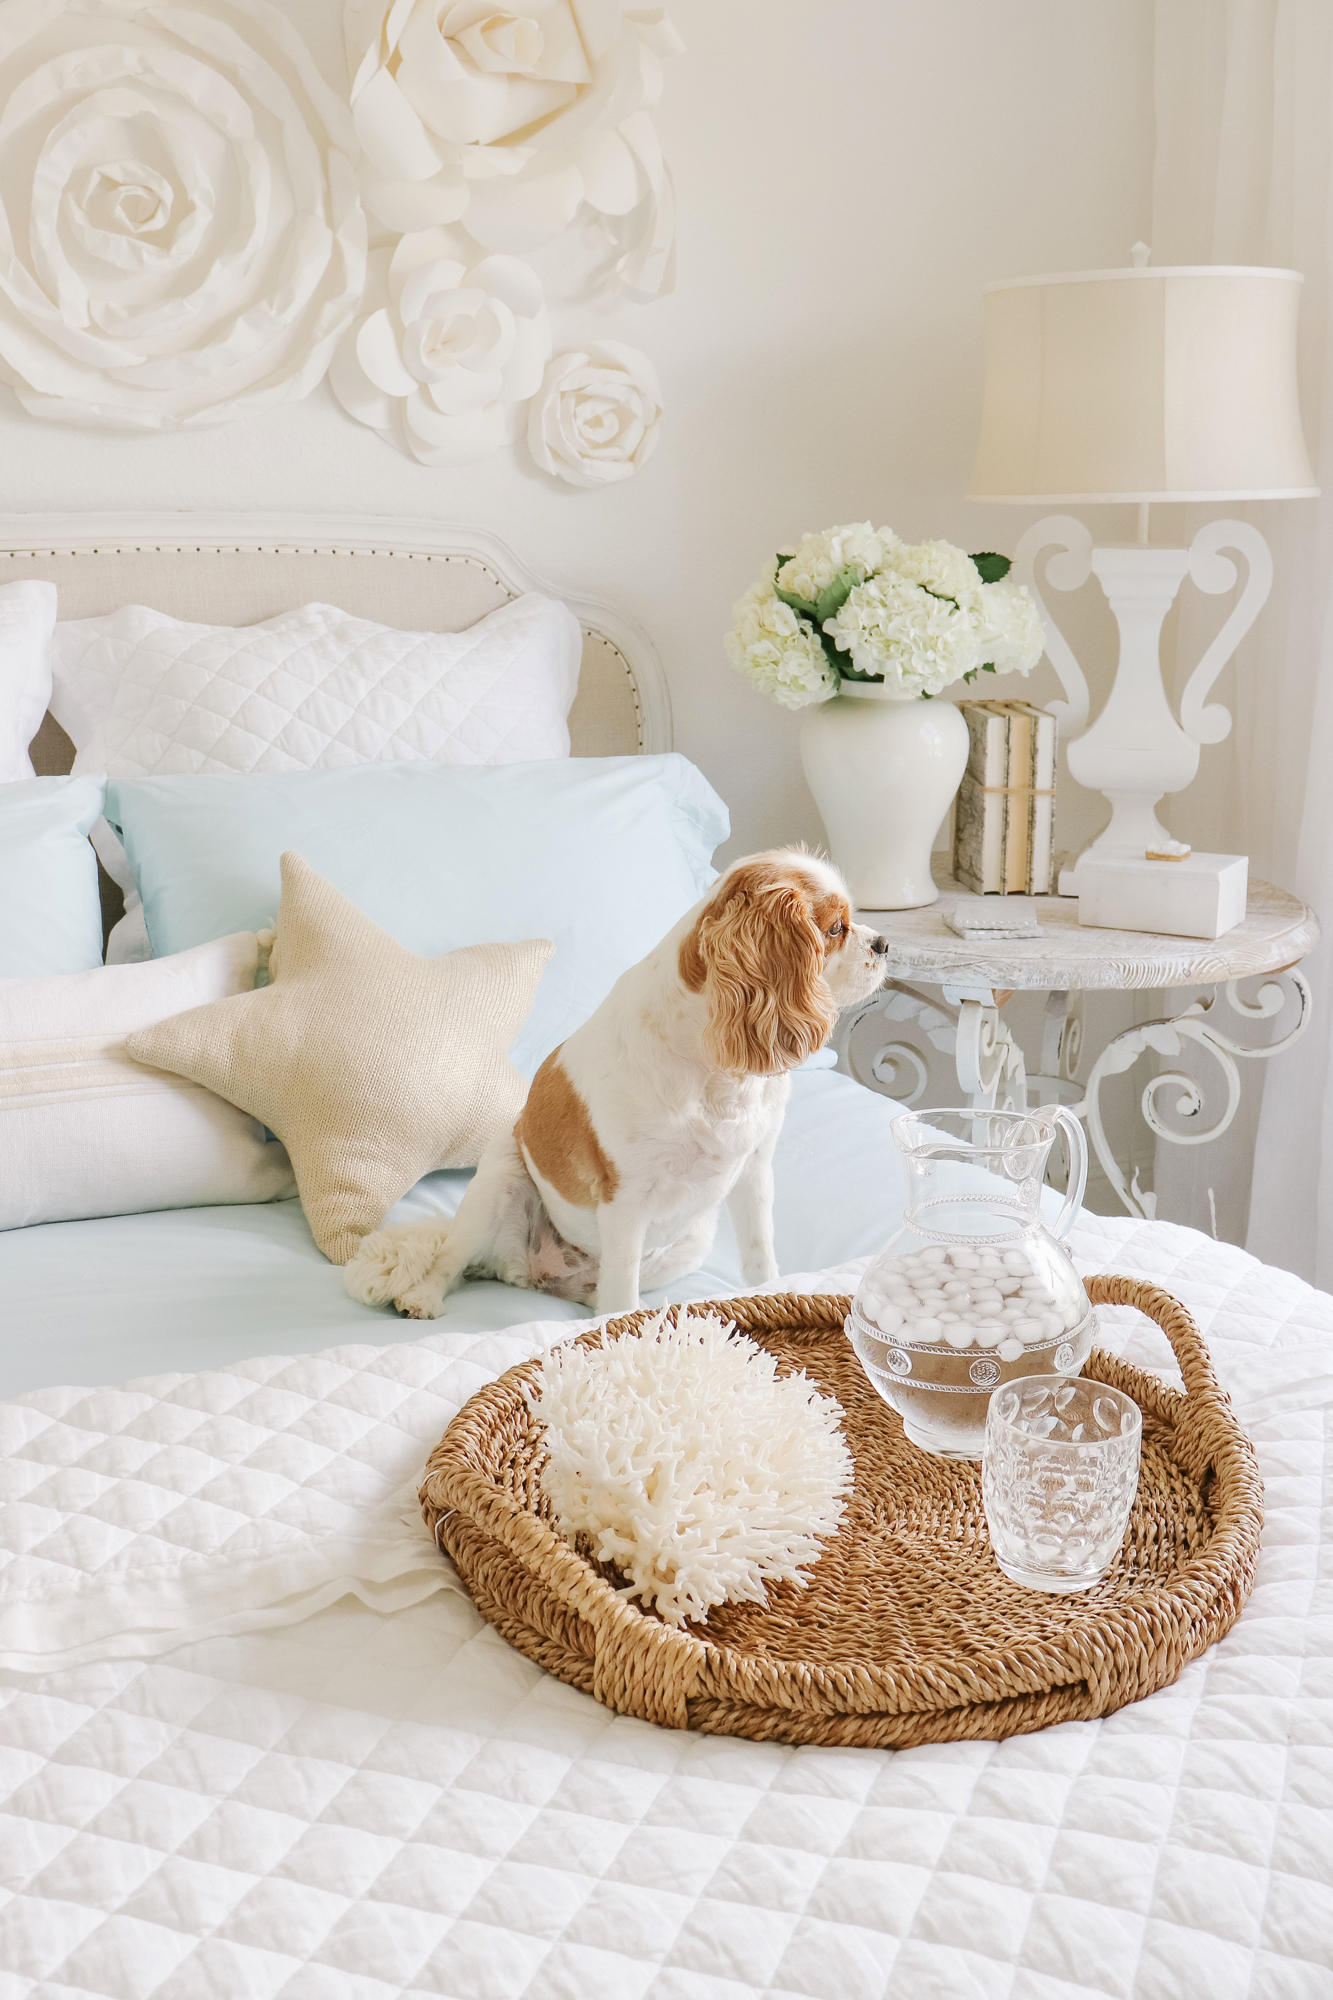 Summer Coastal Home Decor on a Budget - Beachy & relaxed vibes in a coastal themed bedroom. Affordable home decor options in the blue tones.